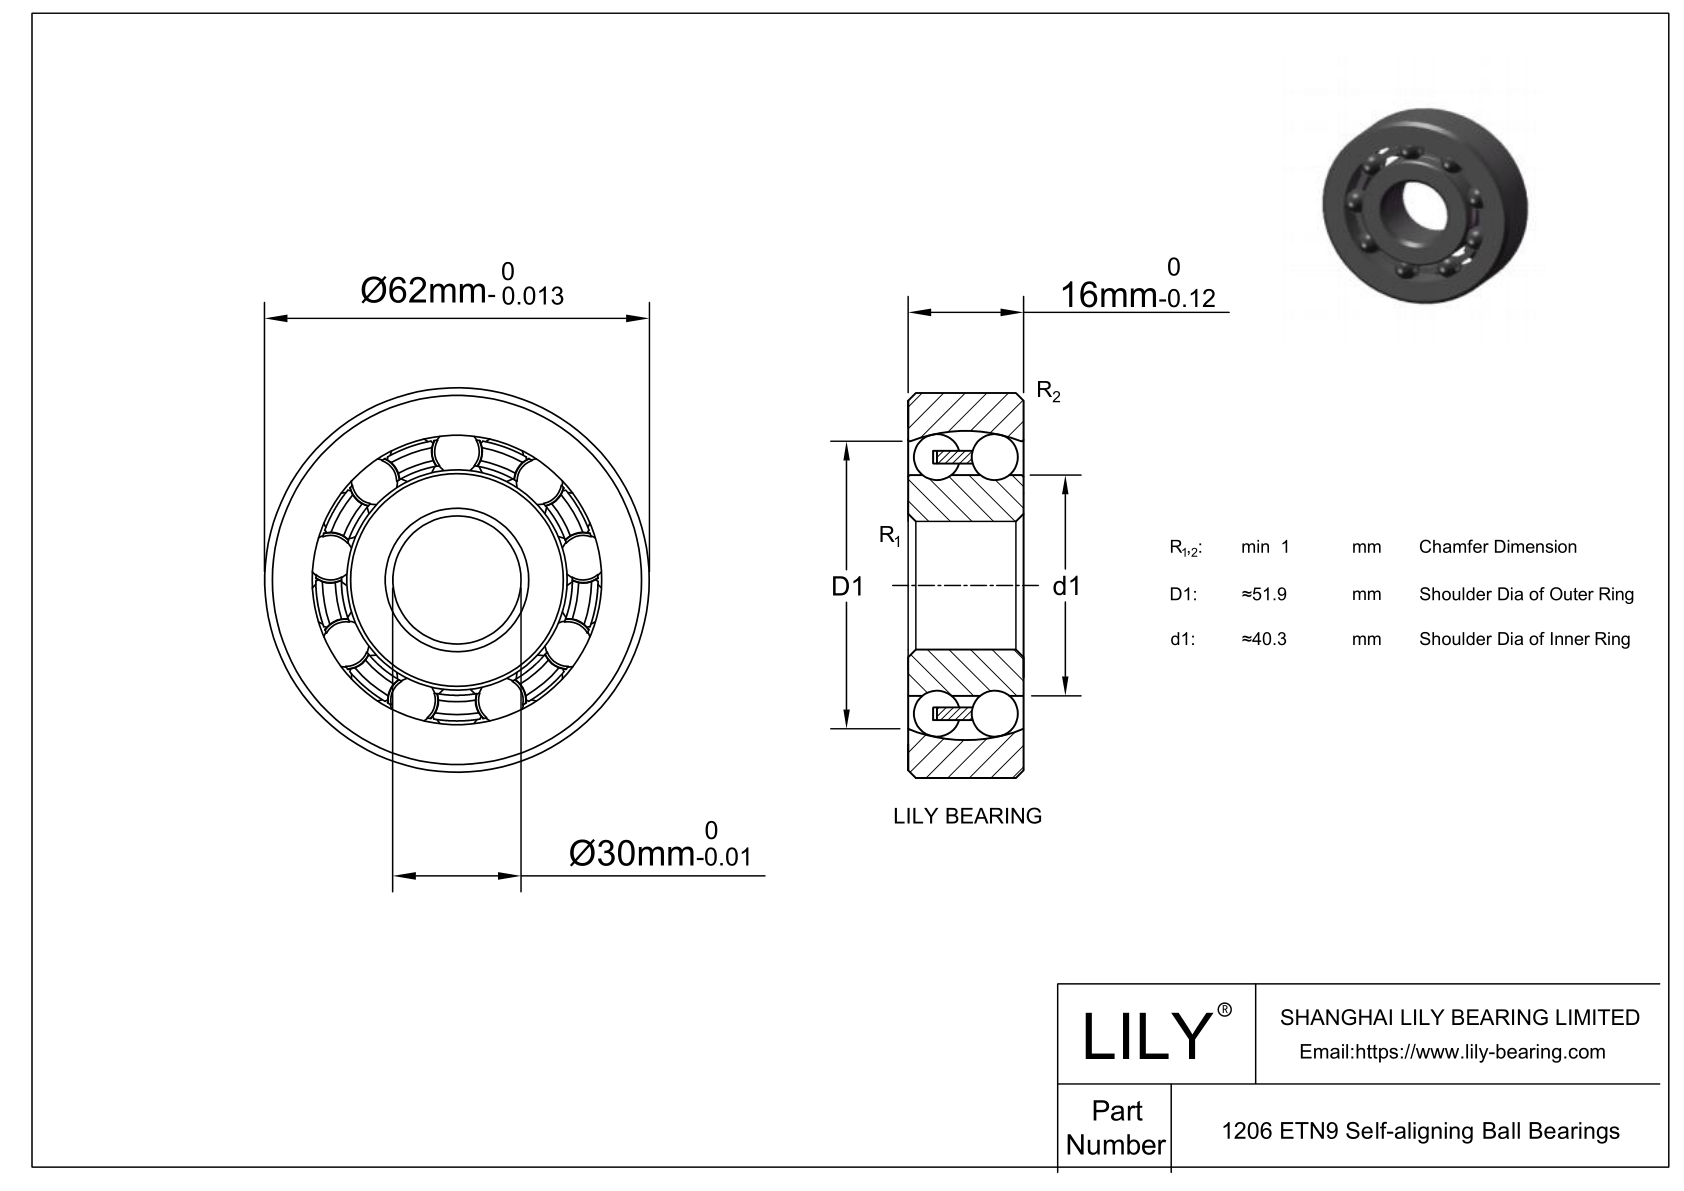 S1206 ETN9 Stainless Steel Self Aligning Ball Bearings cad drawing